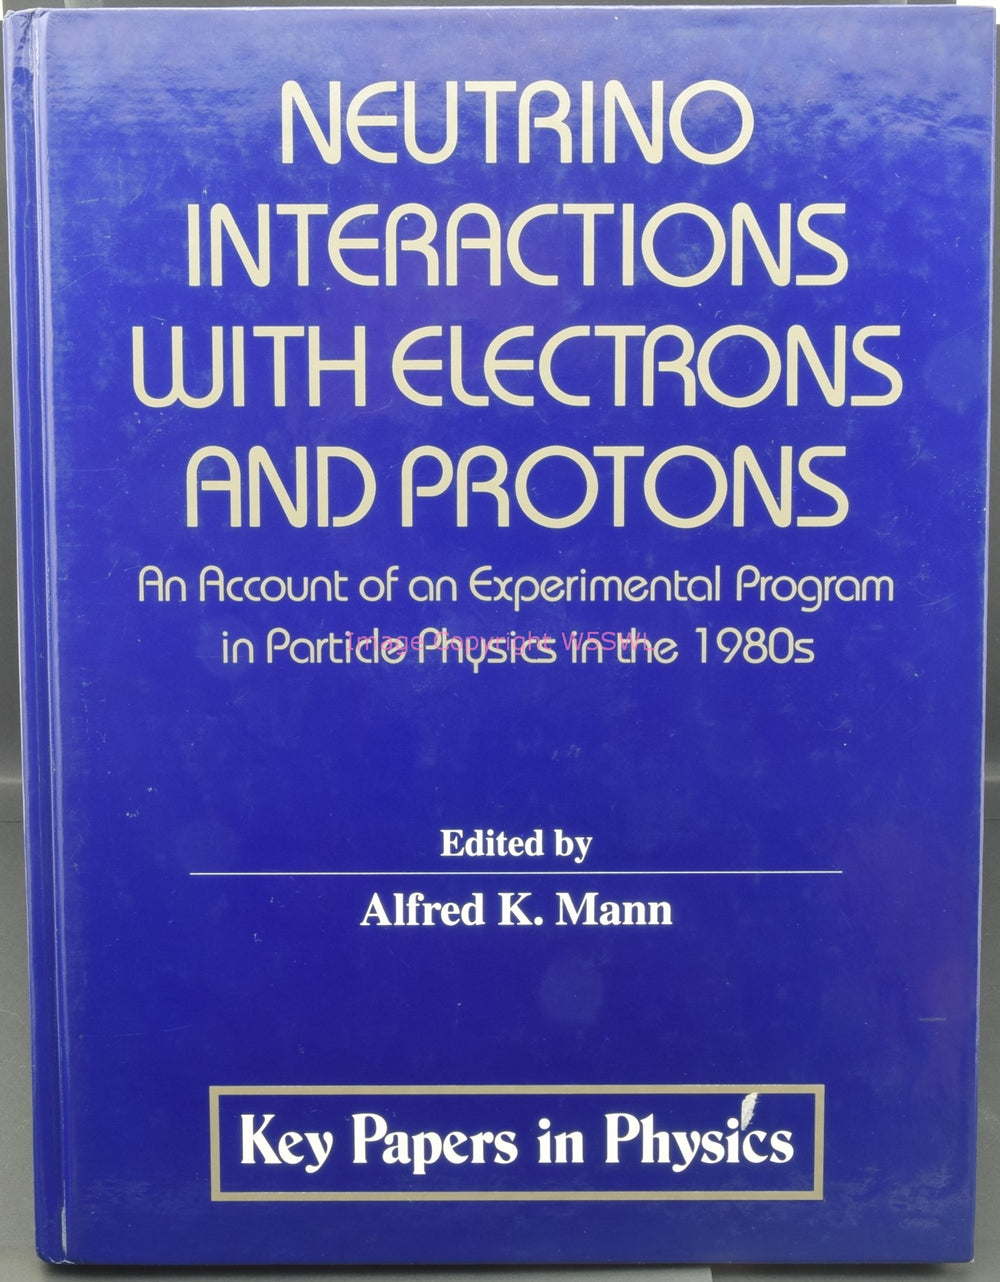 Neutrino Interactions With Electrons And Protons Experimental Particle Physics - Dave's Hobby Shop by W5SWL